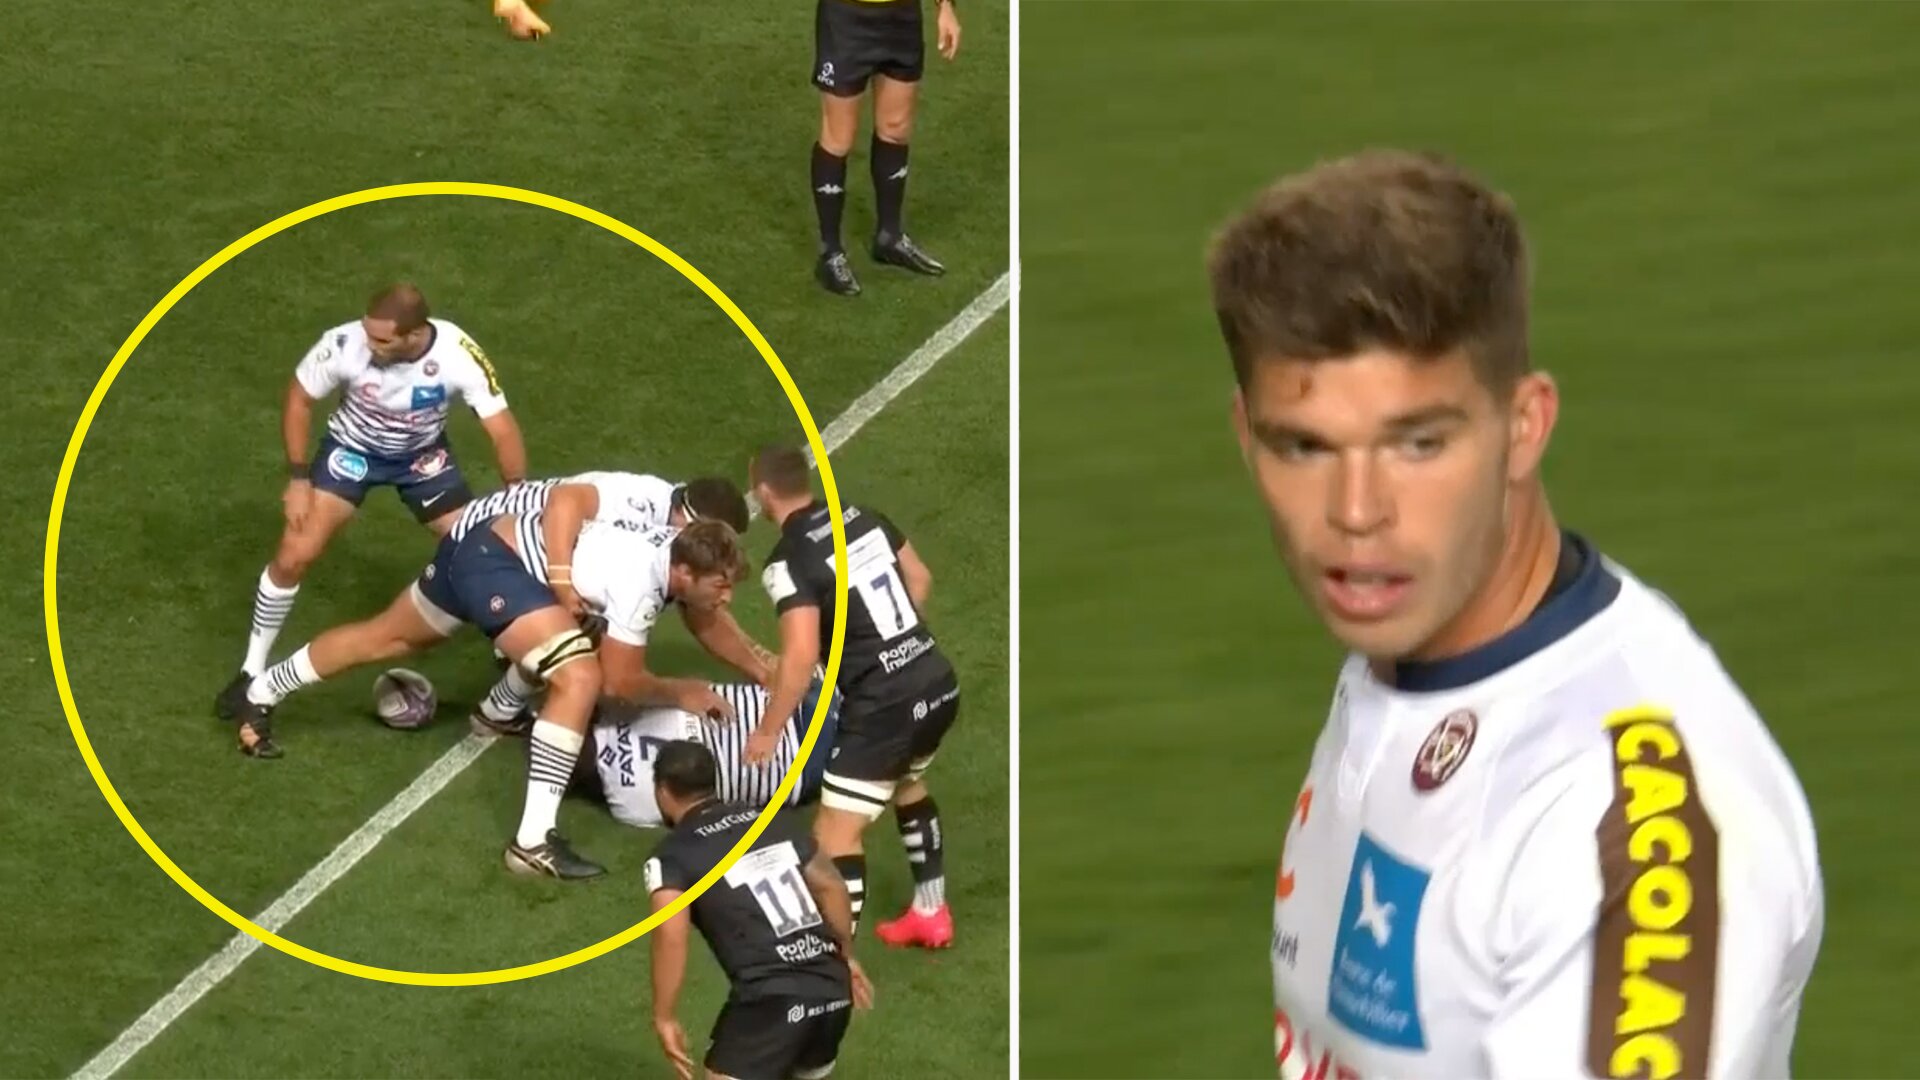 French wonder kid embarrasses Bristol Bears with incredible solo score